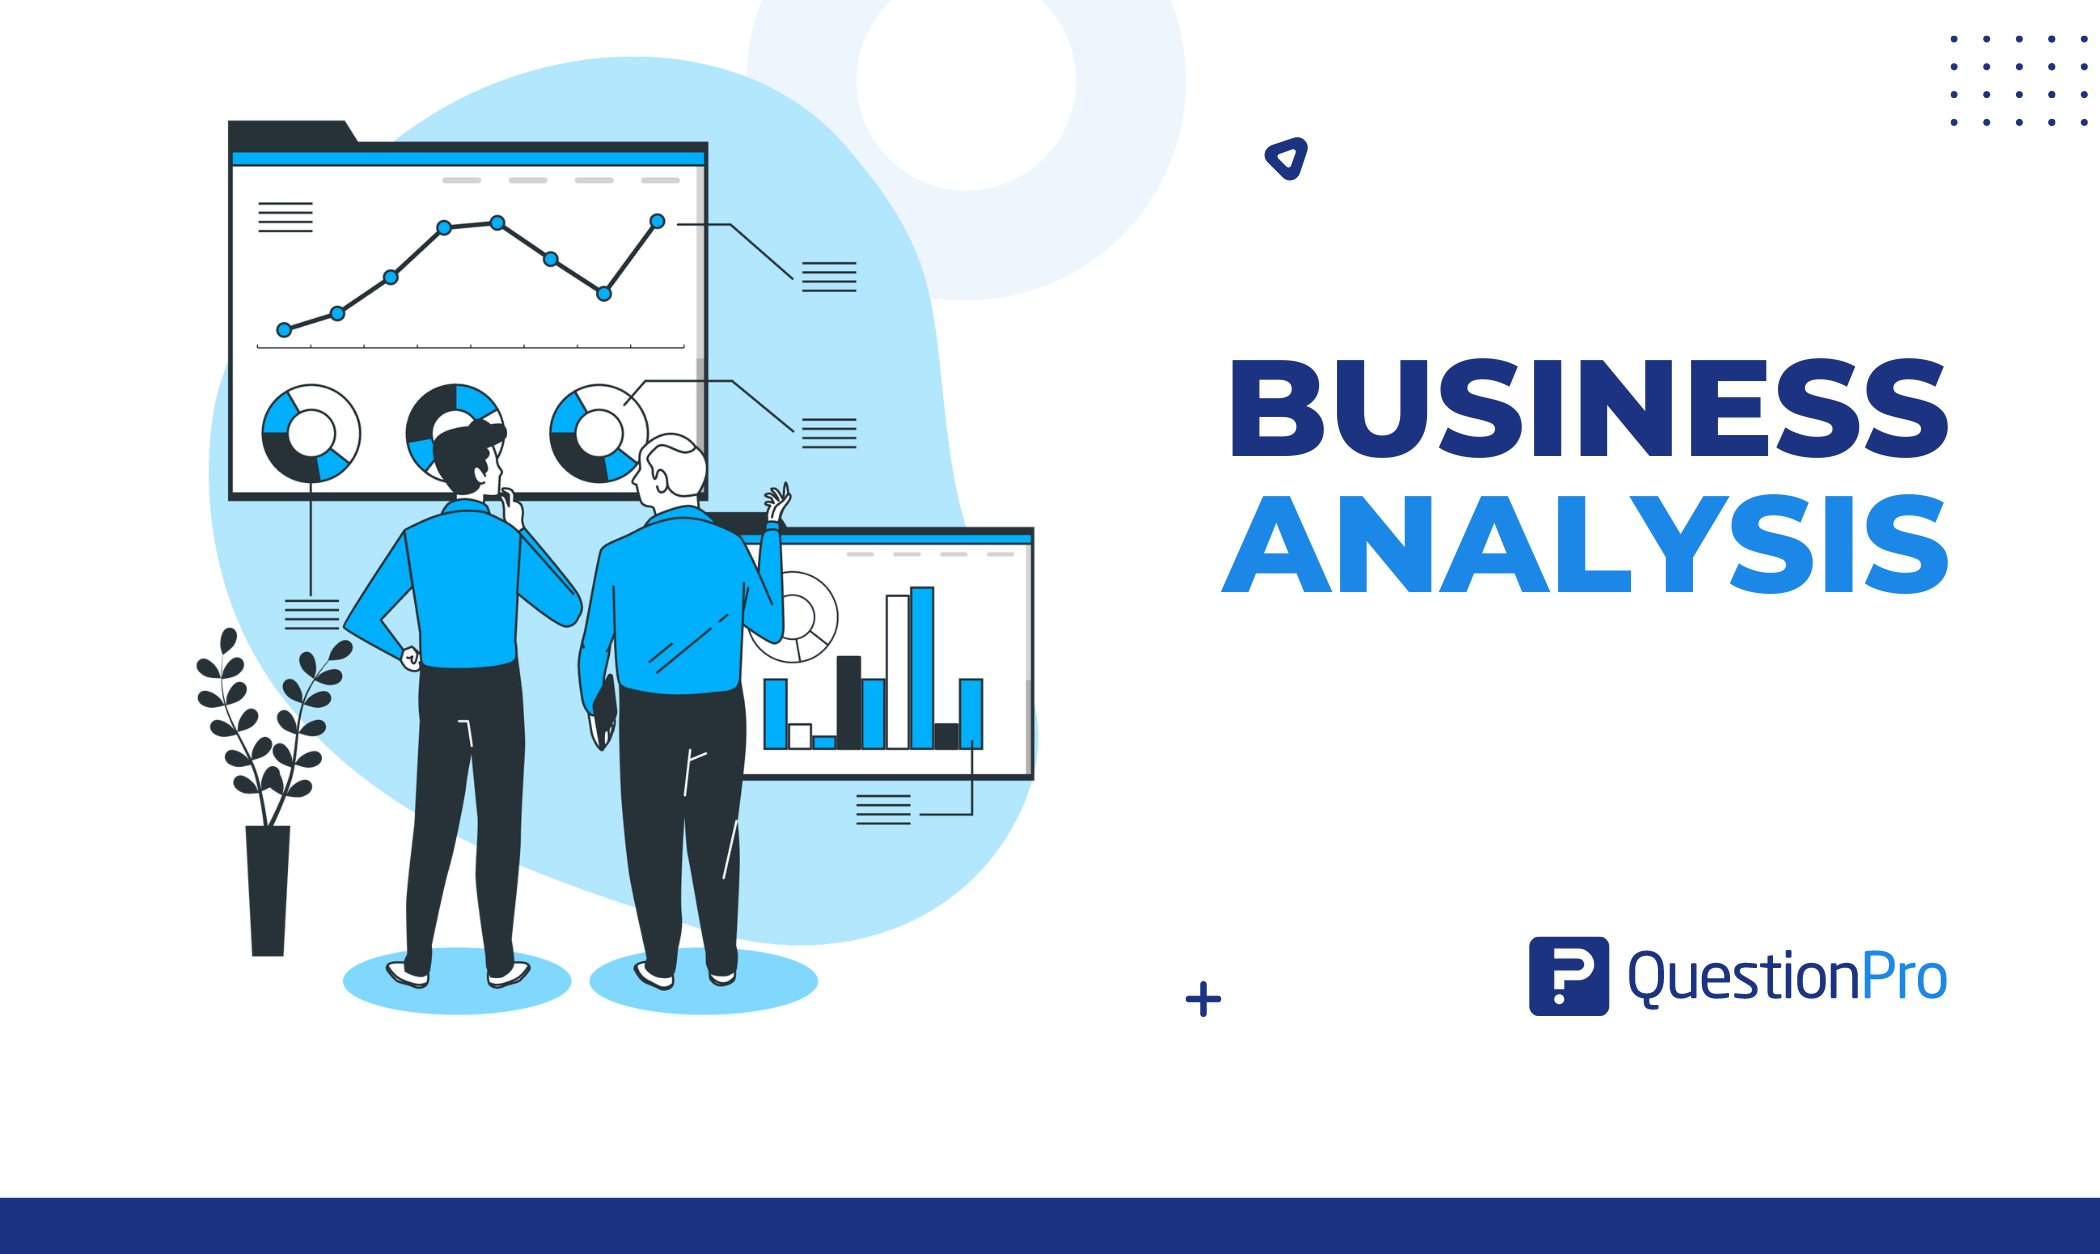 Business analysis uses tools and techniques to provide value to stakeholders. It assists organizations in identifying their needs.